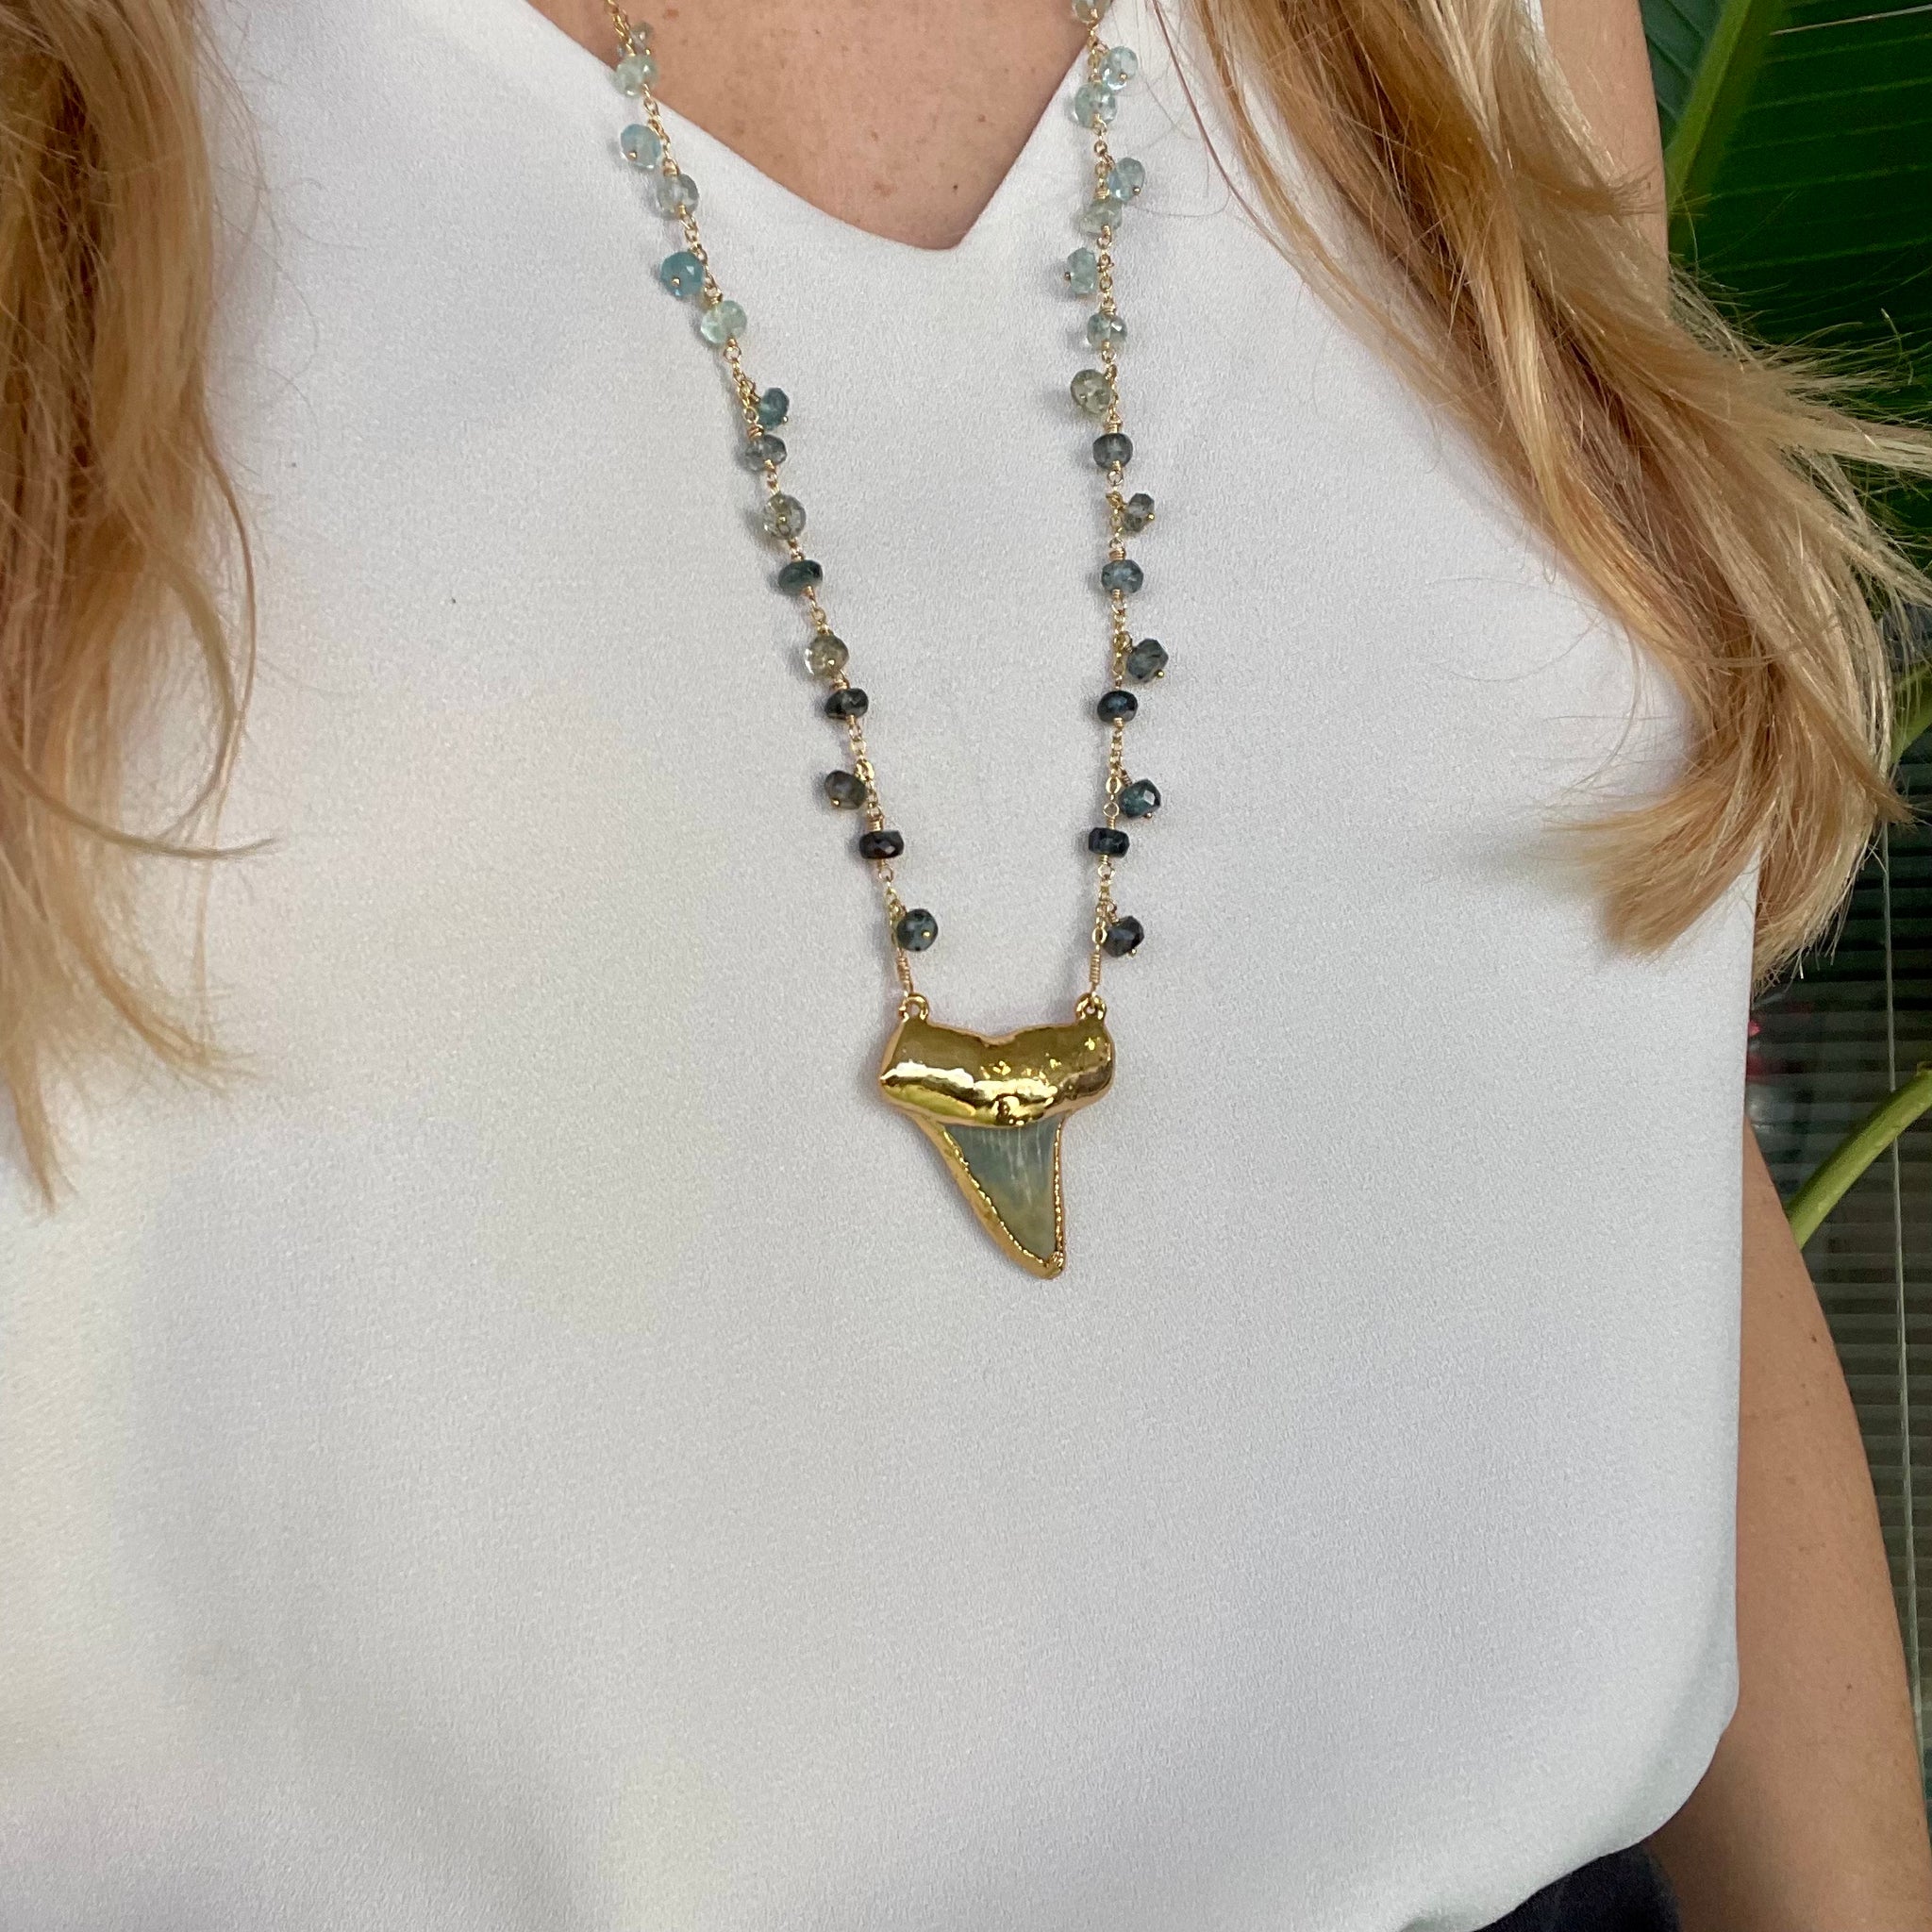 1641 - One of a Kind Shark Tooth and Gemstone Necklace